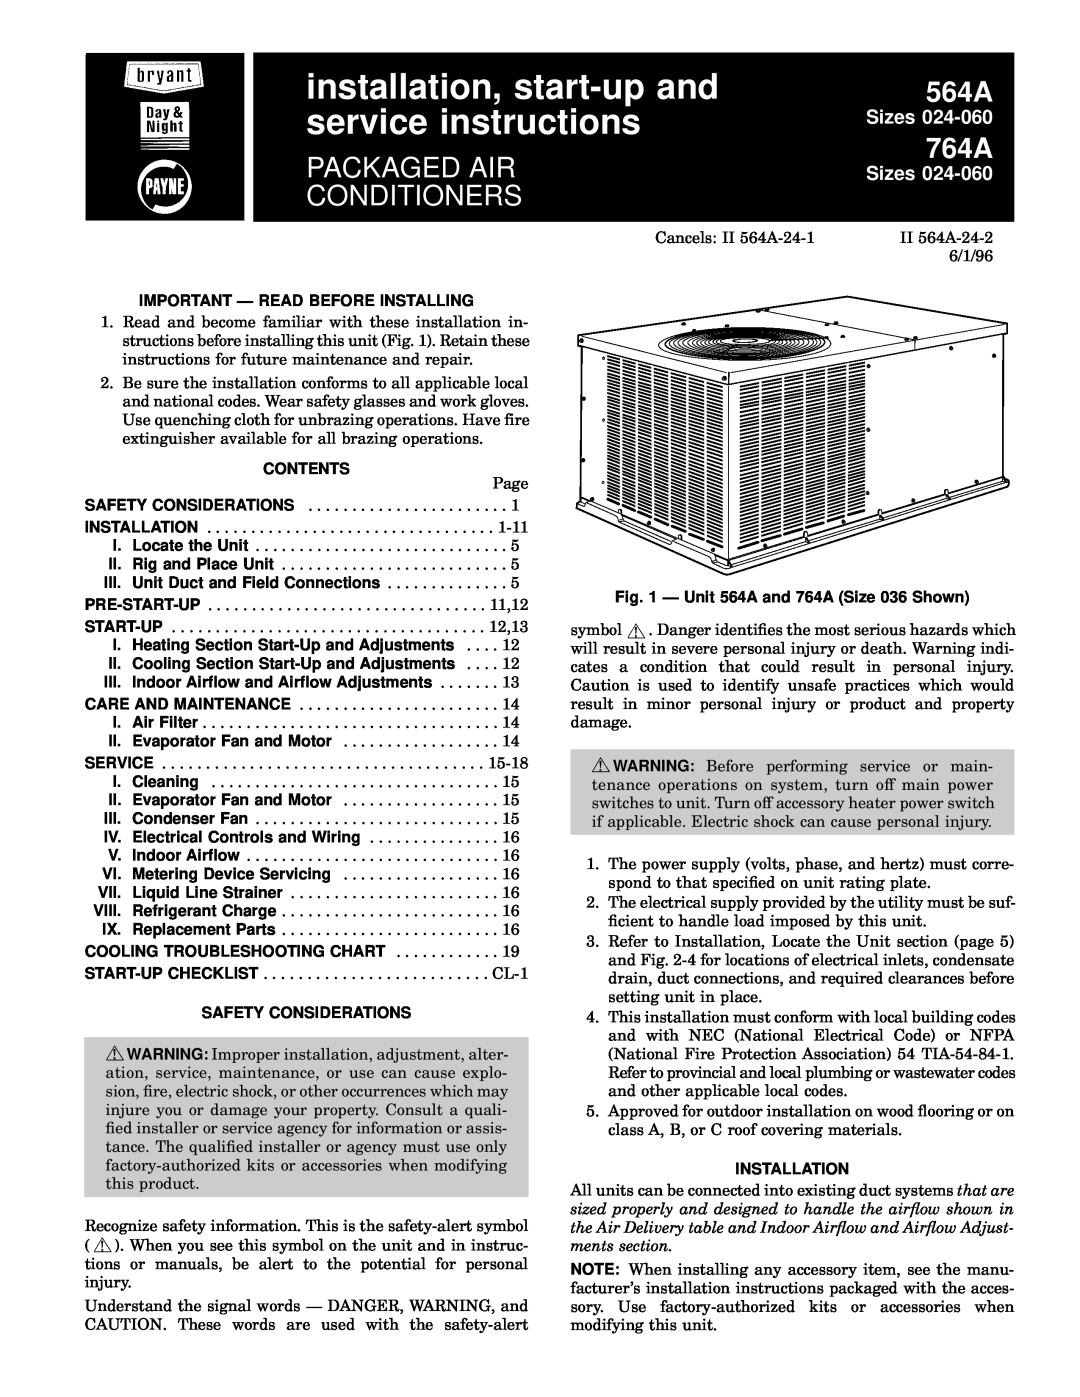 Bryant installation instructions Important Ð Read Before Installing, Contents, Ð Unit 564A and 764A Size 036 Shown 